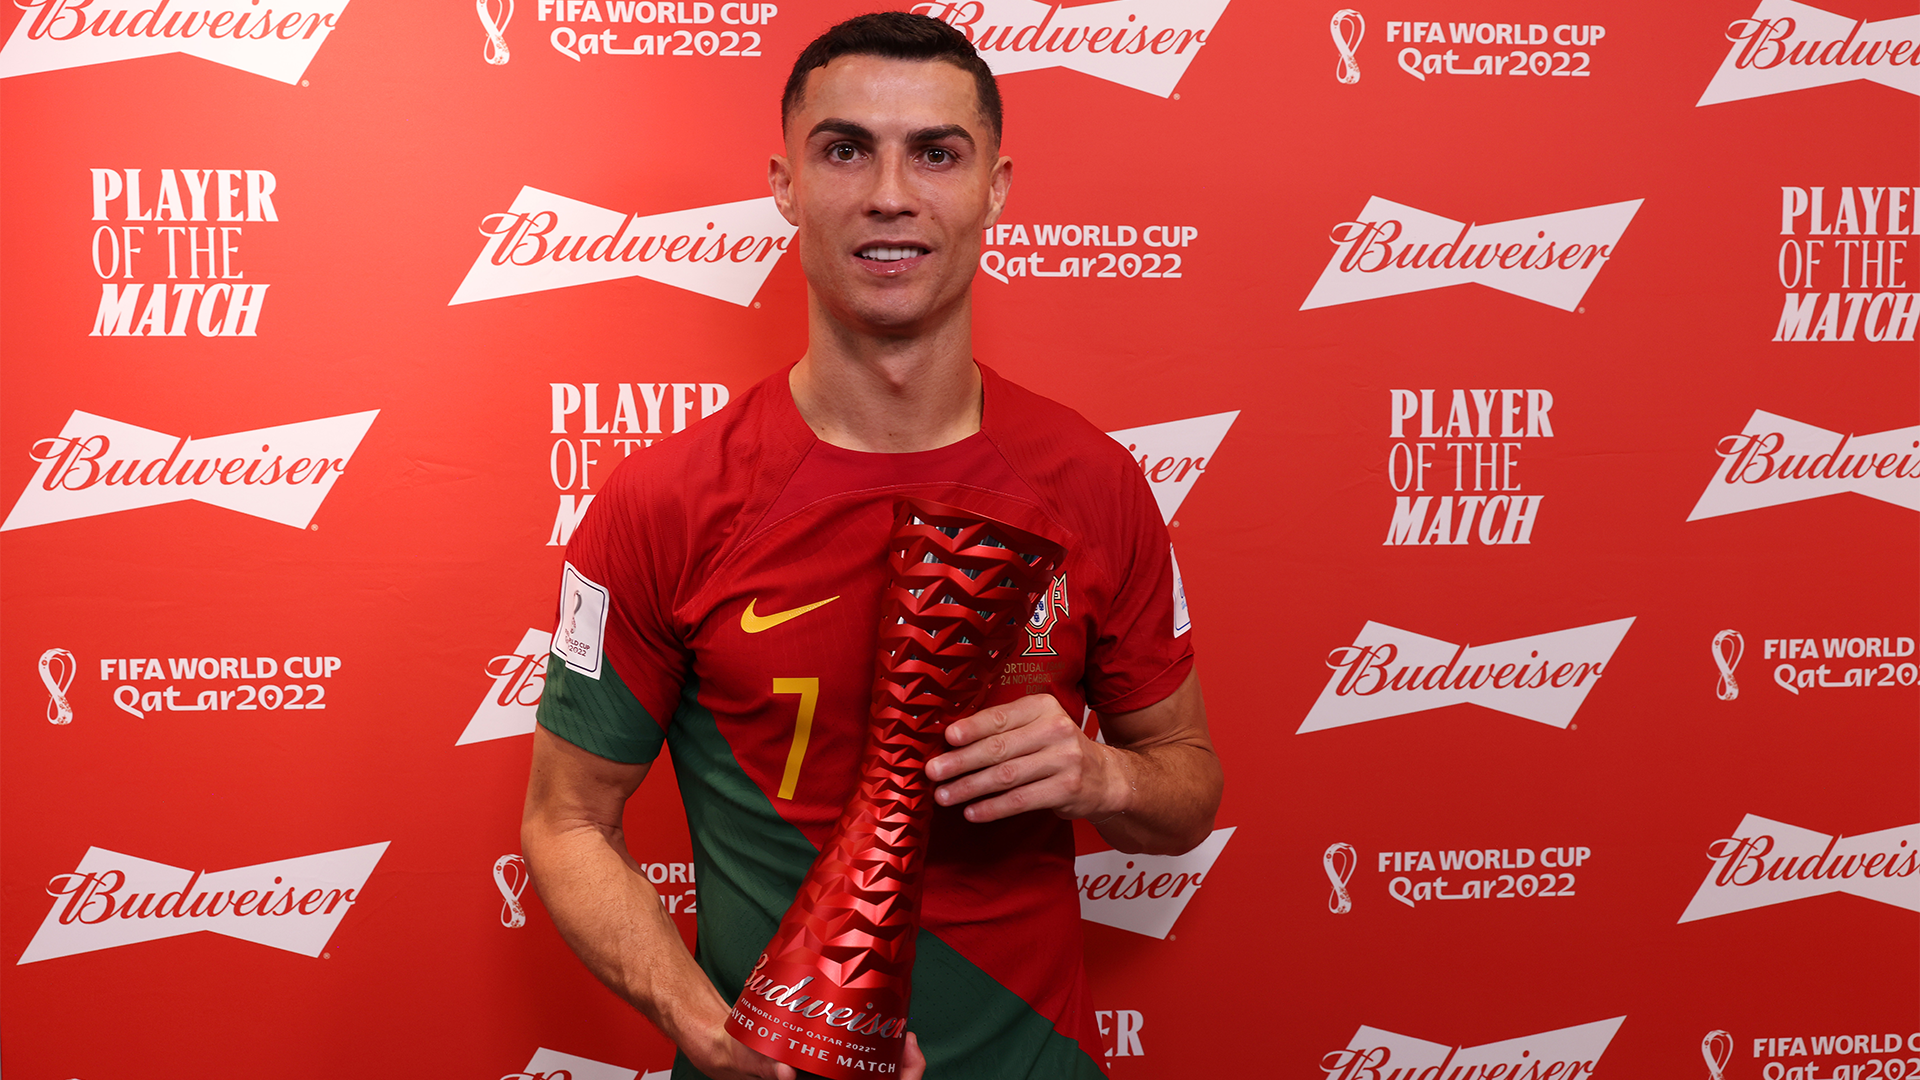 Cristiano Ronaldo 'very proud' to set World Cup record with penalty against Ghana | Goal.com